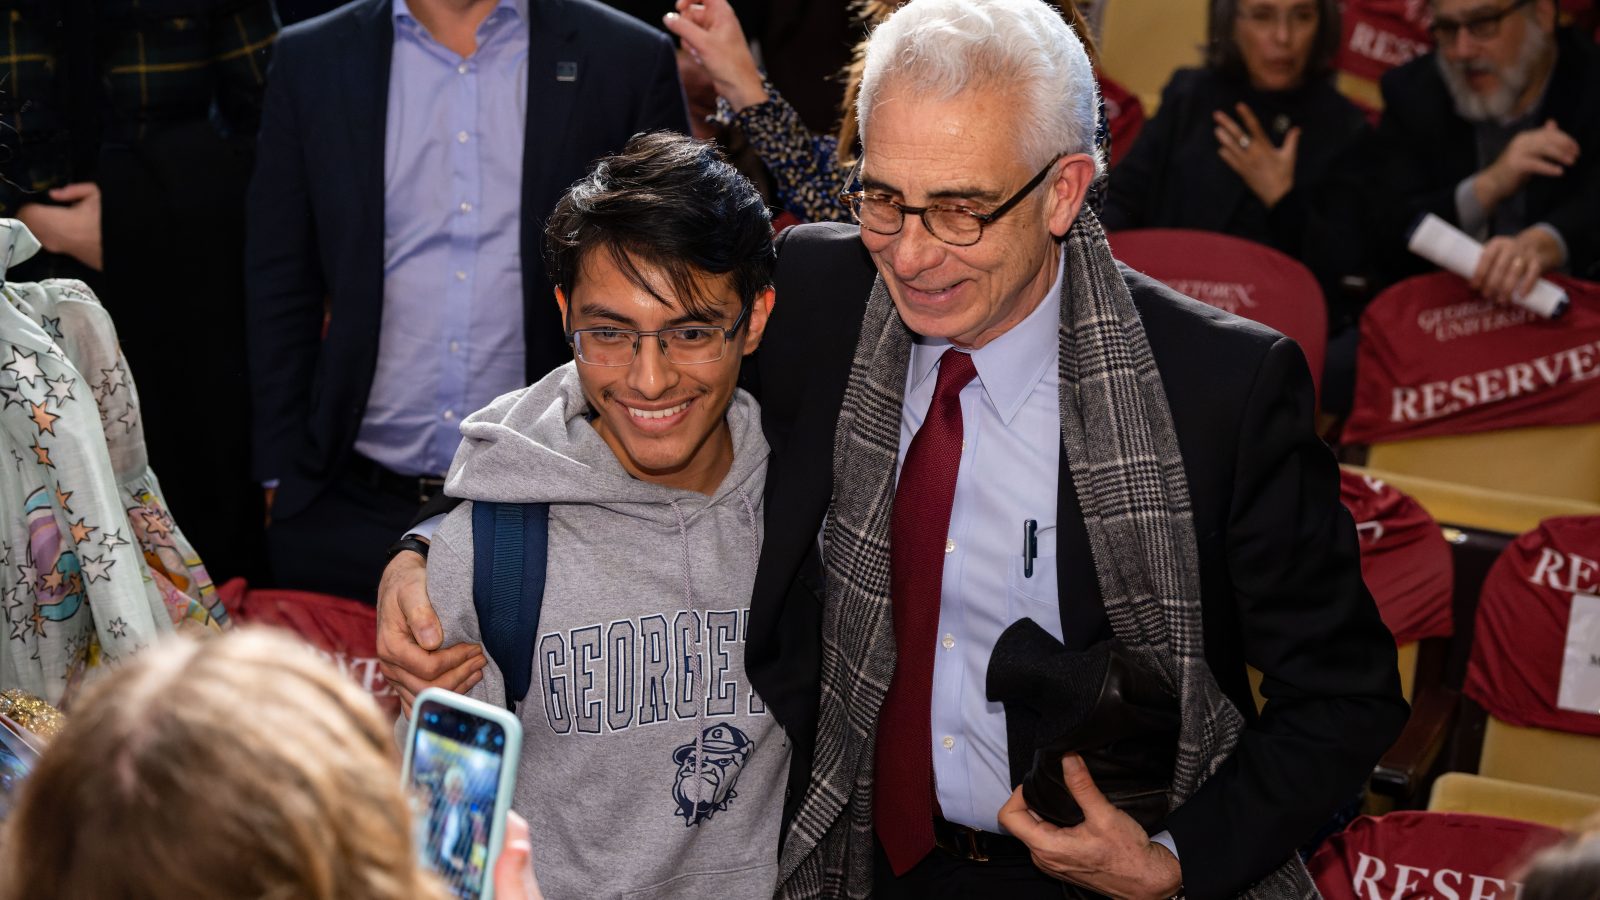 A former Latin American president (right) dressed in a black suit and red tie poses for a picture with a Georgetown student (left) wearing a gray sweatshirt that says &quot;Georgetown.&quot;